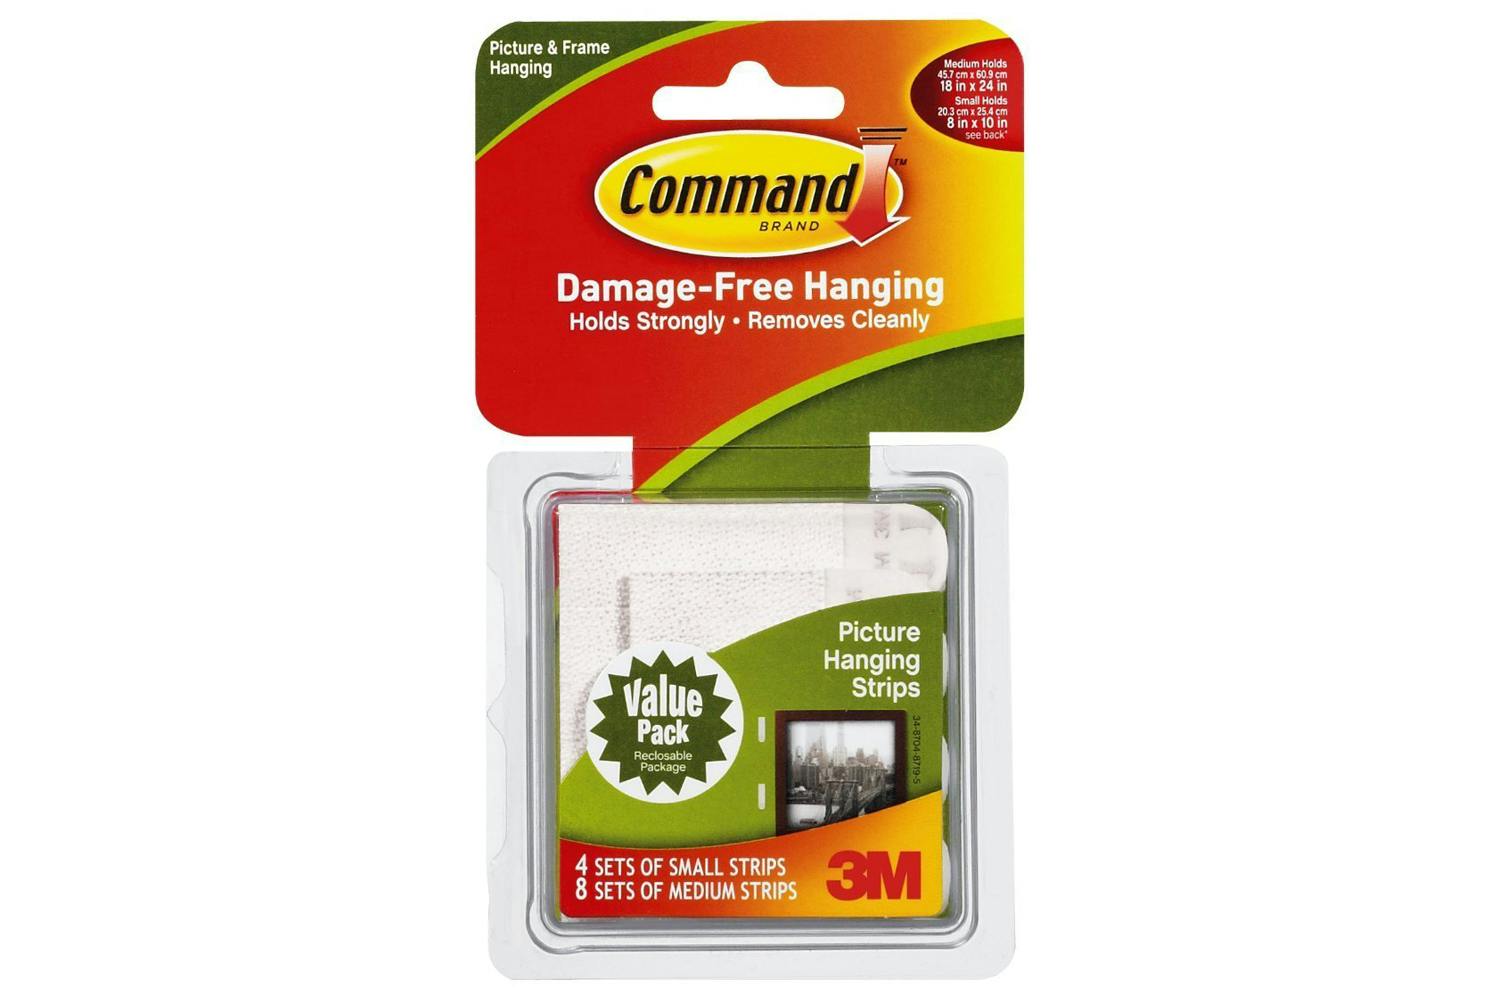 Command Large Picture Hanging Strips, Damage Free Hanging Picture Hangers,  No Tools Wall Hanging Strips for Living Spaces, 14 Black Adhesive Strip